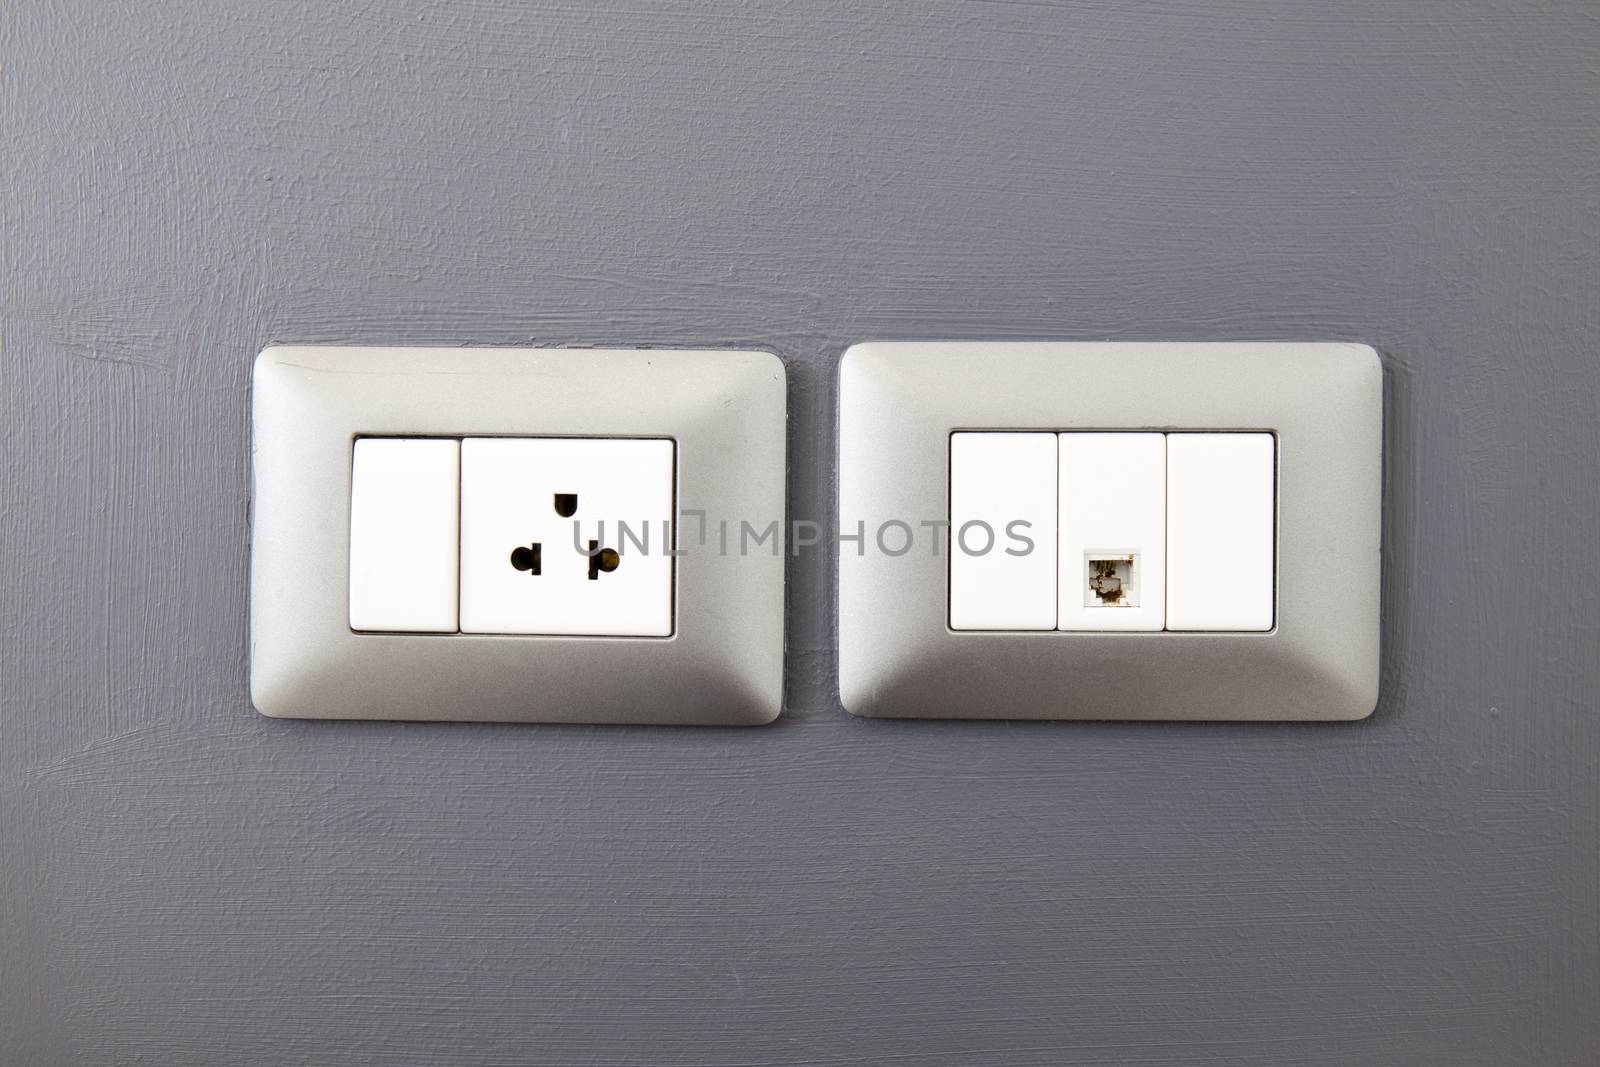 electric plug and network ethernet port on wall